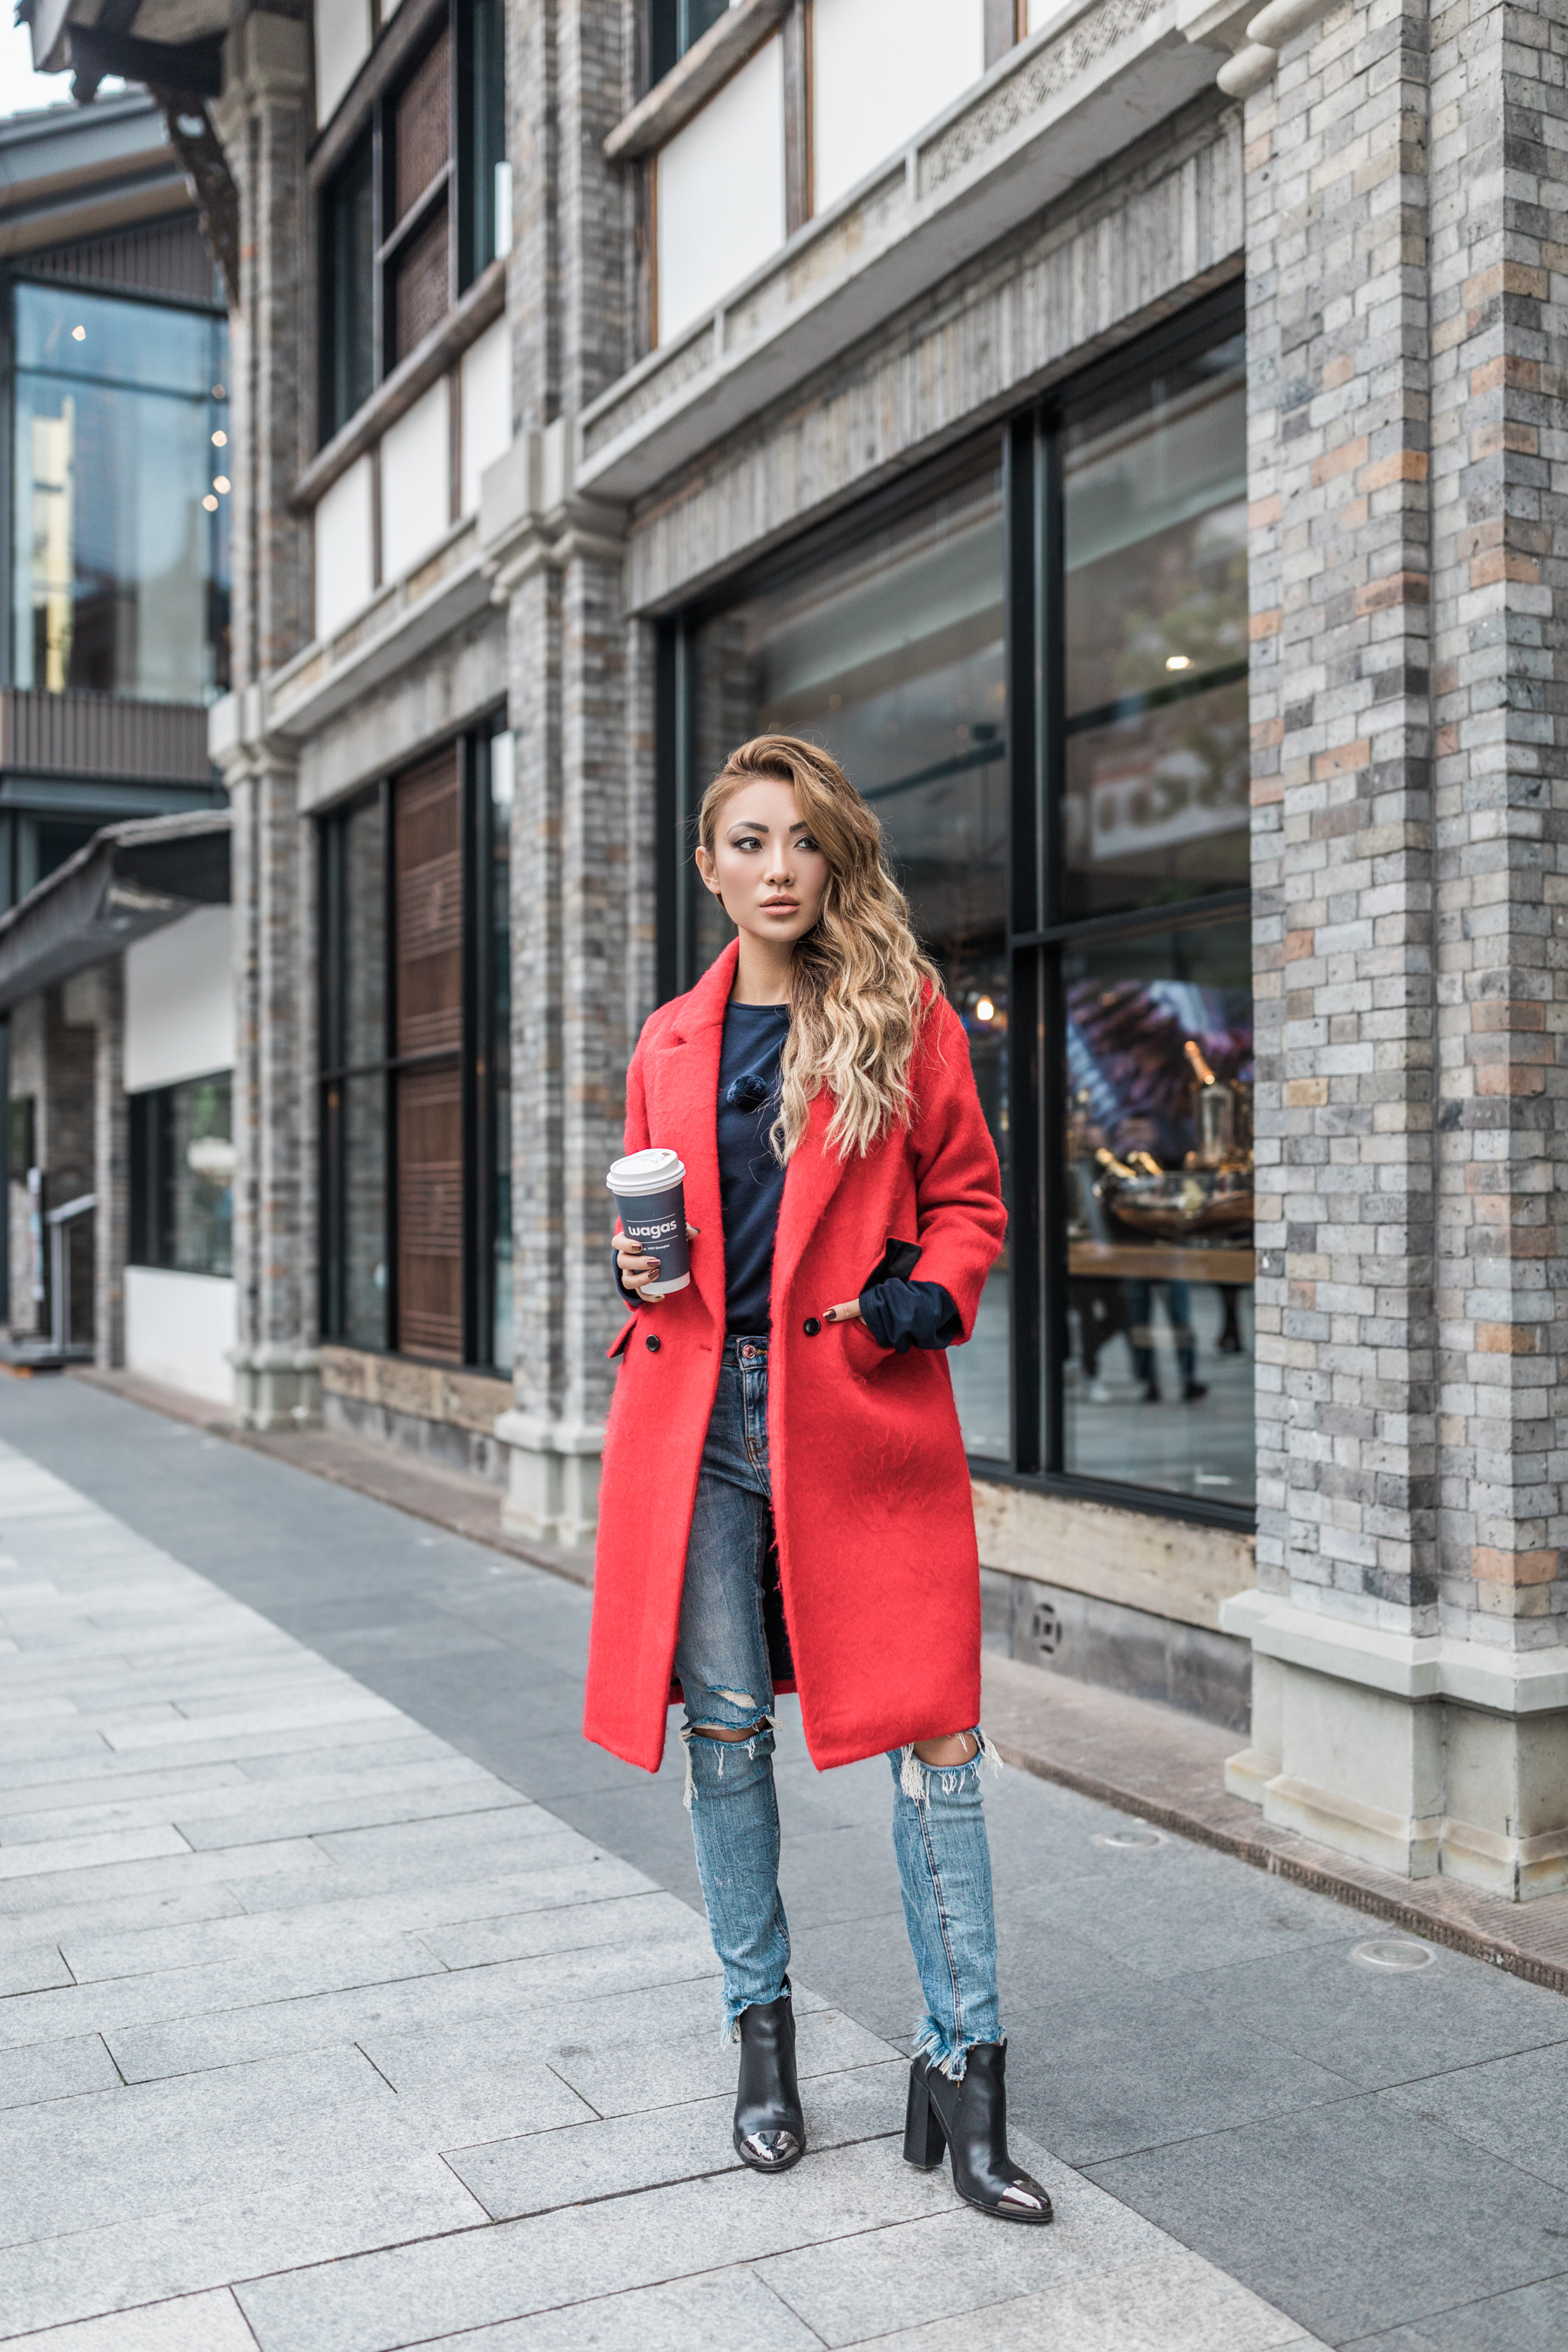 Essential Winter Coats Every Girl Should Own - Red Menswear Coat // NotJessFashion.com